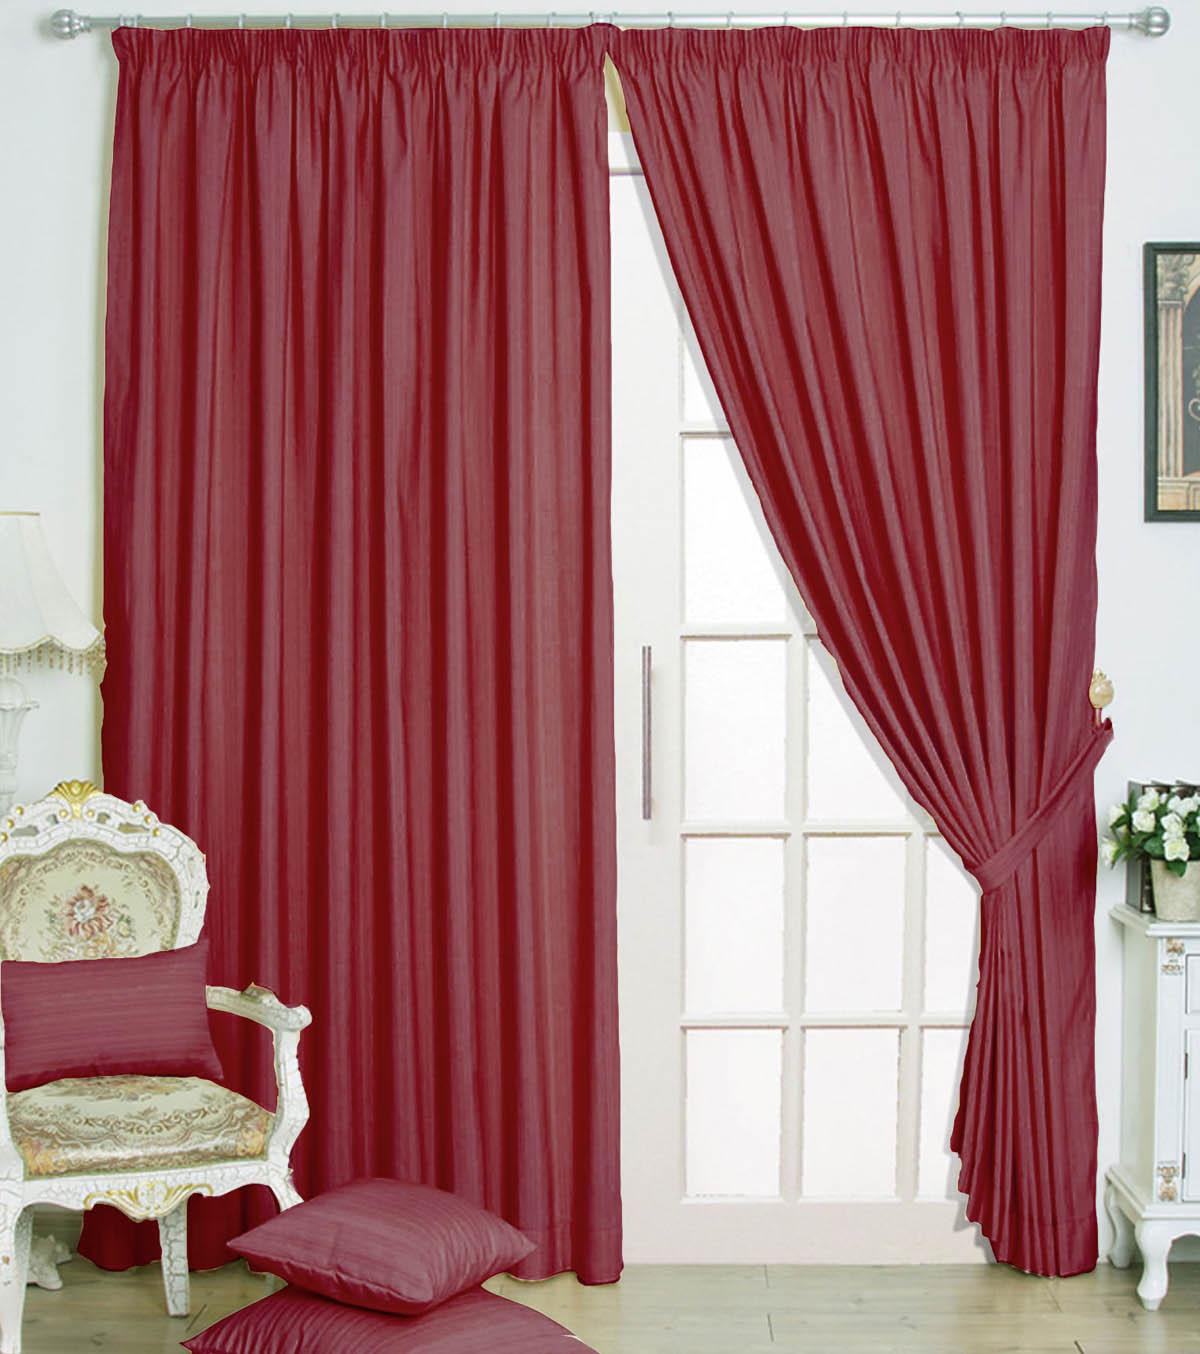 Eclipse Blackout 3 Tape Curtains Rio Red